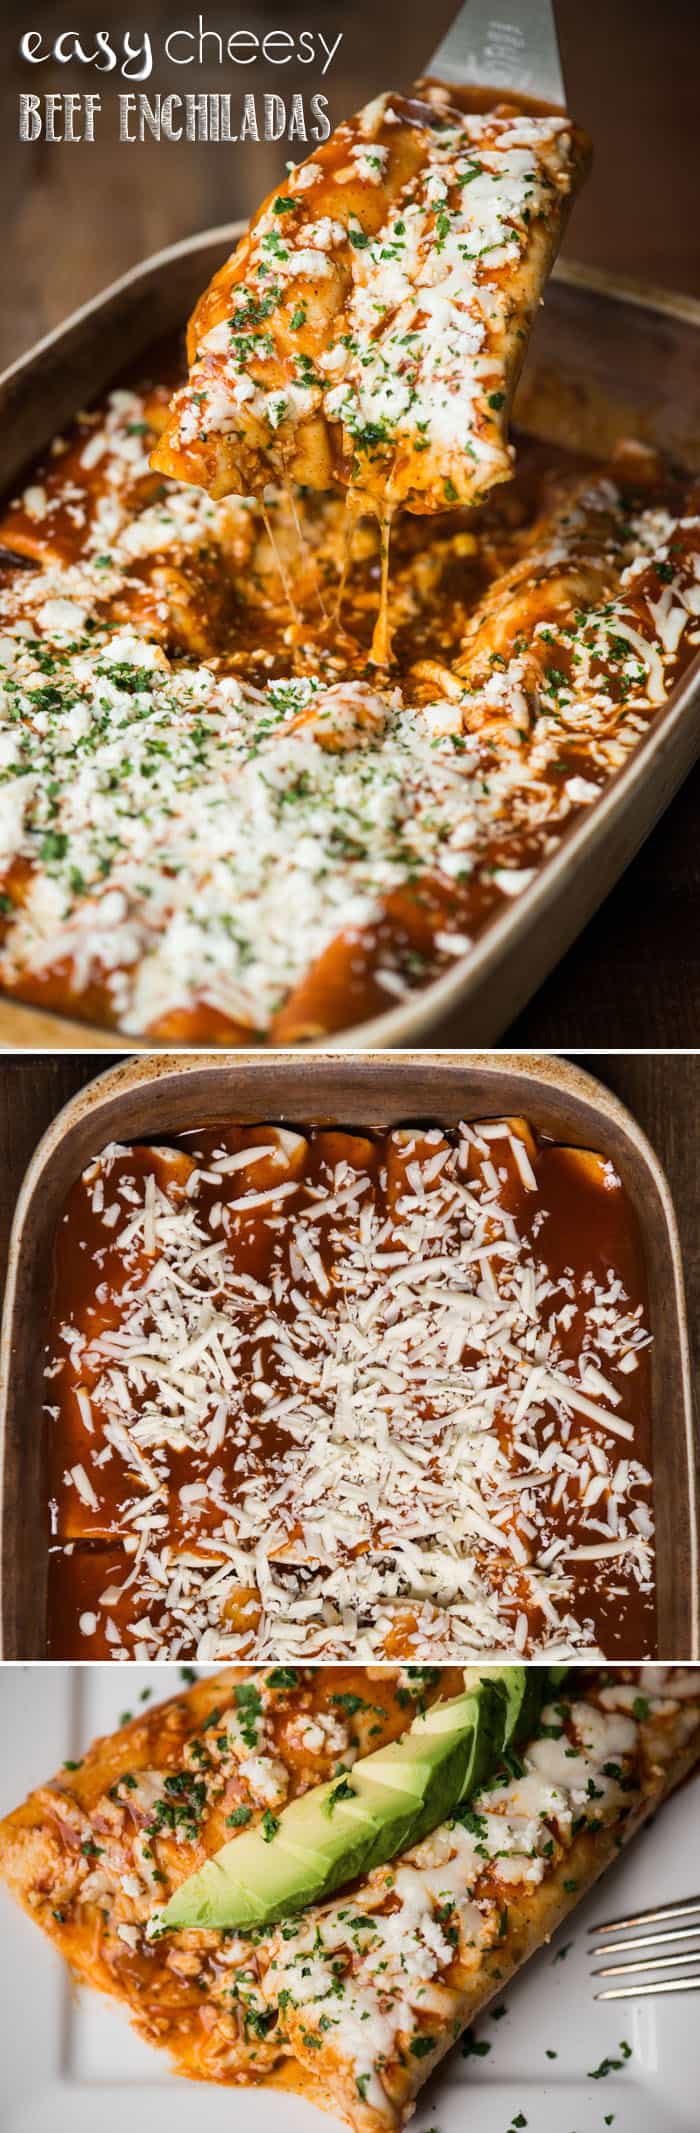 If you\'re looking for a quick and easy dinner that your entire family will love, these Easy Cheesy Beef Enchiladas are sure to please!